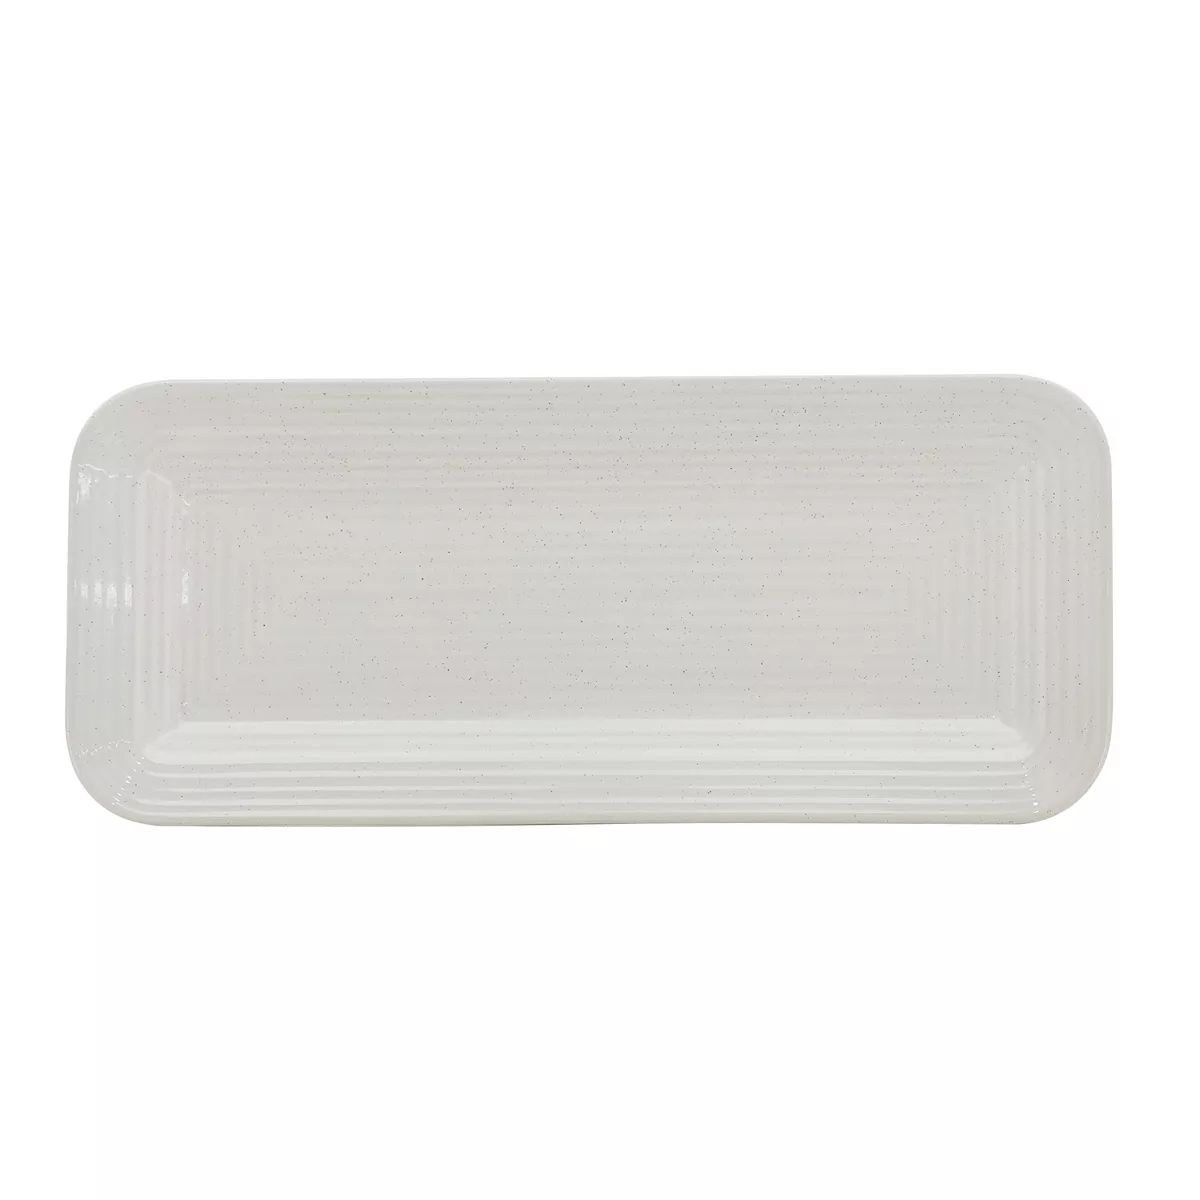 Food Network™ Small Serving Platter Tray | Kohl's